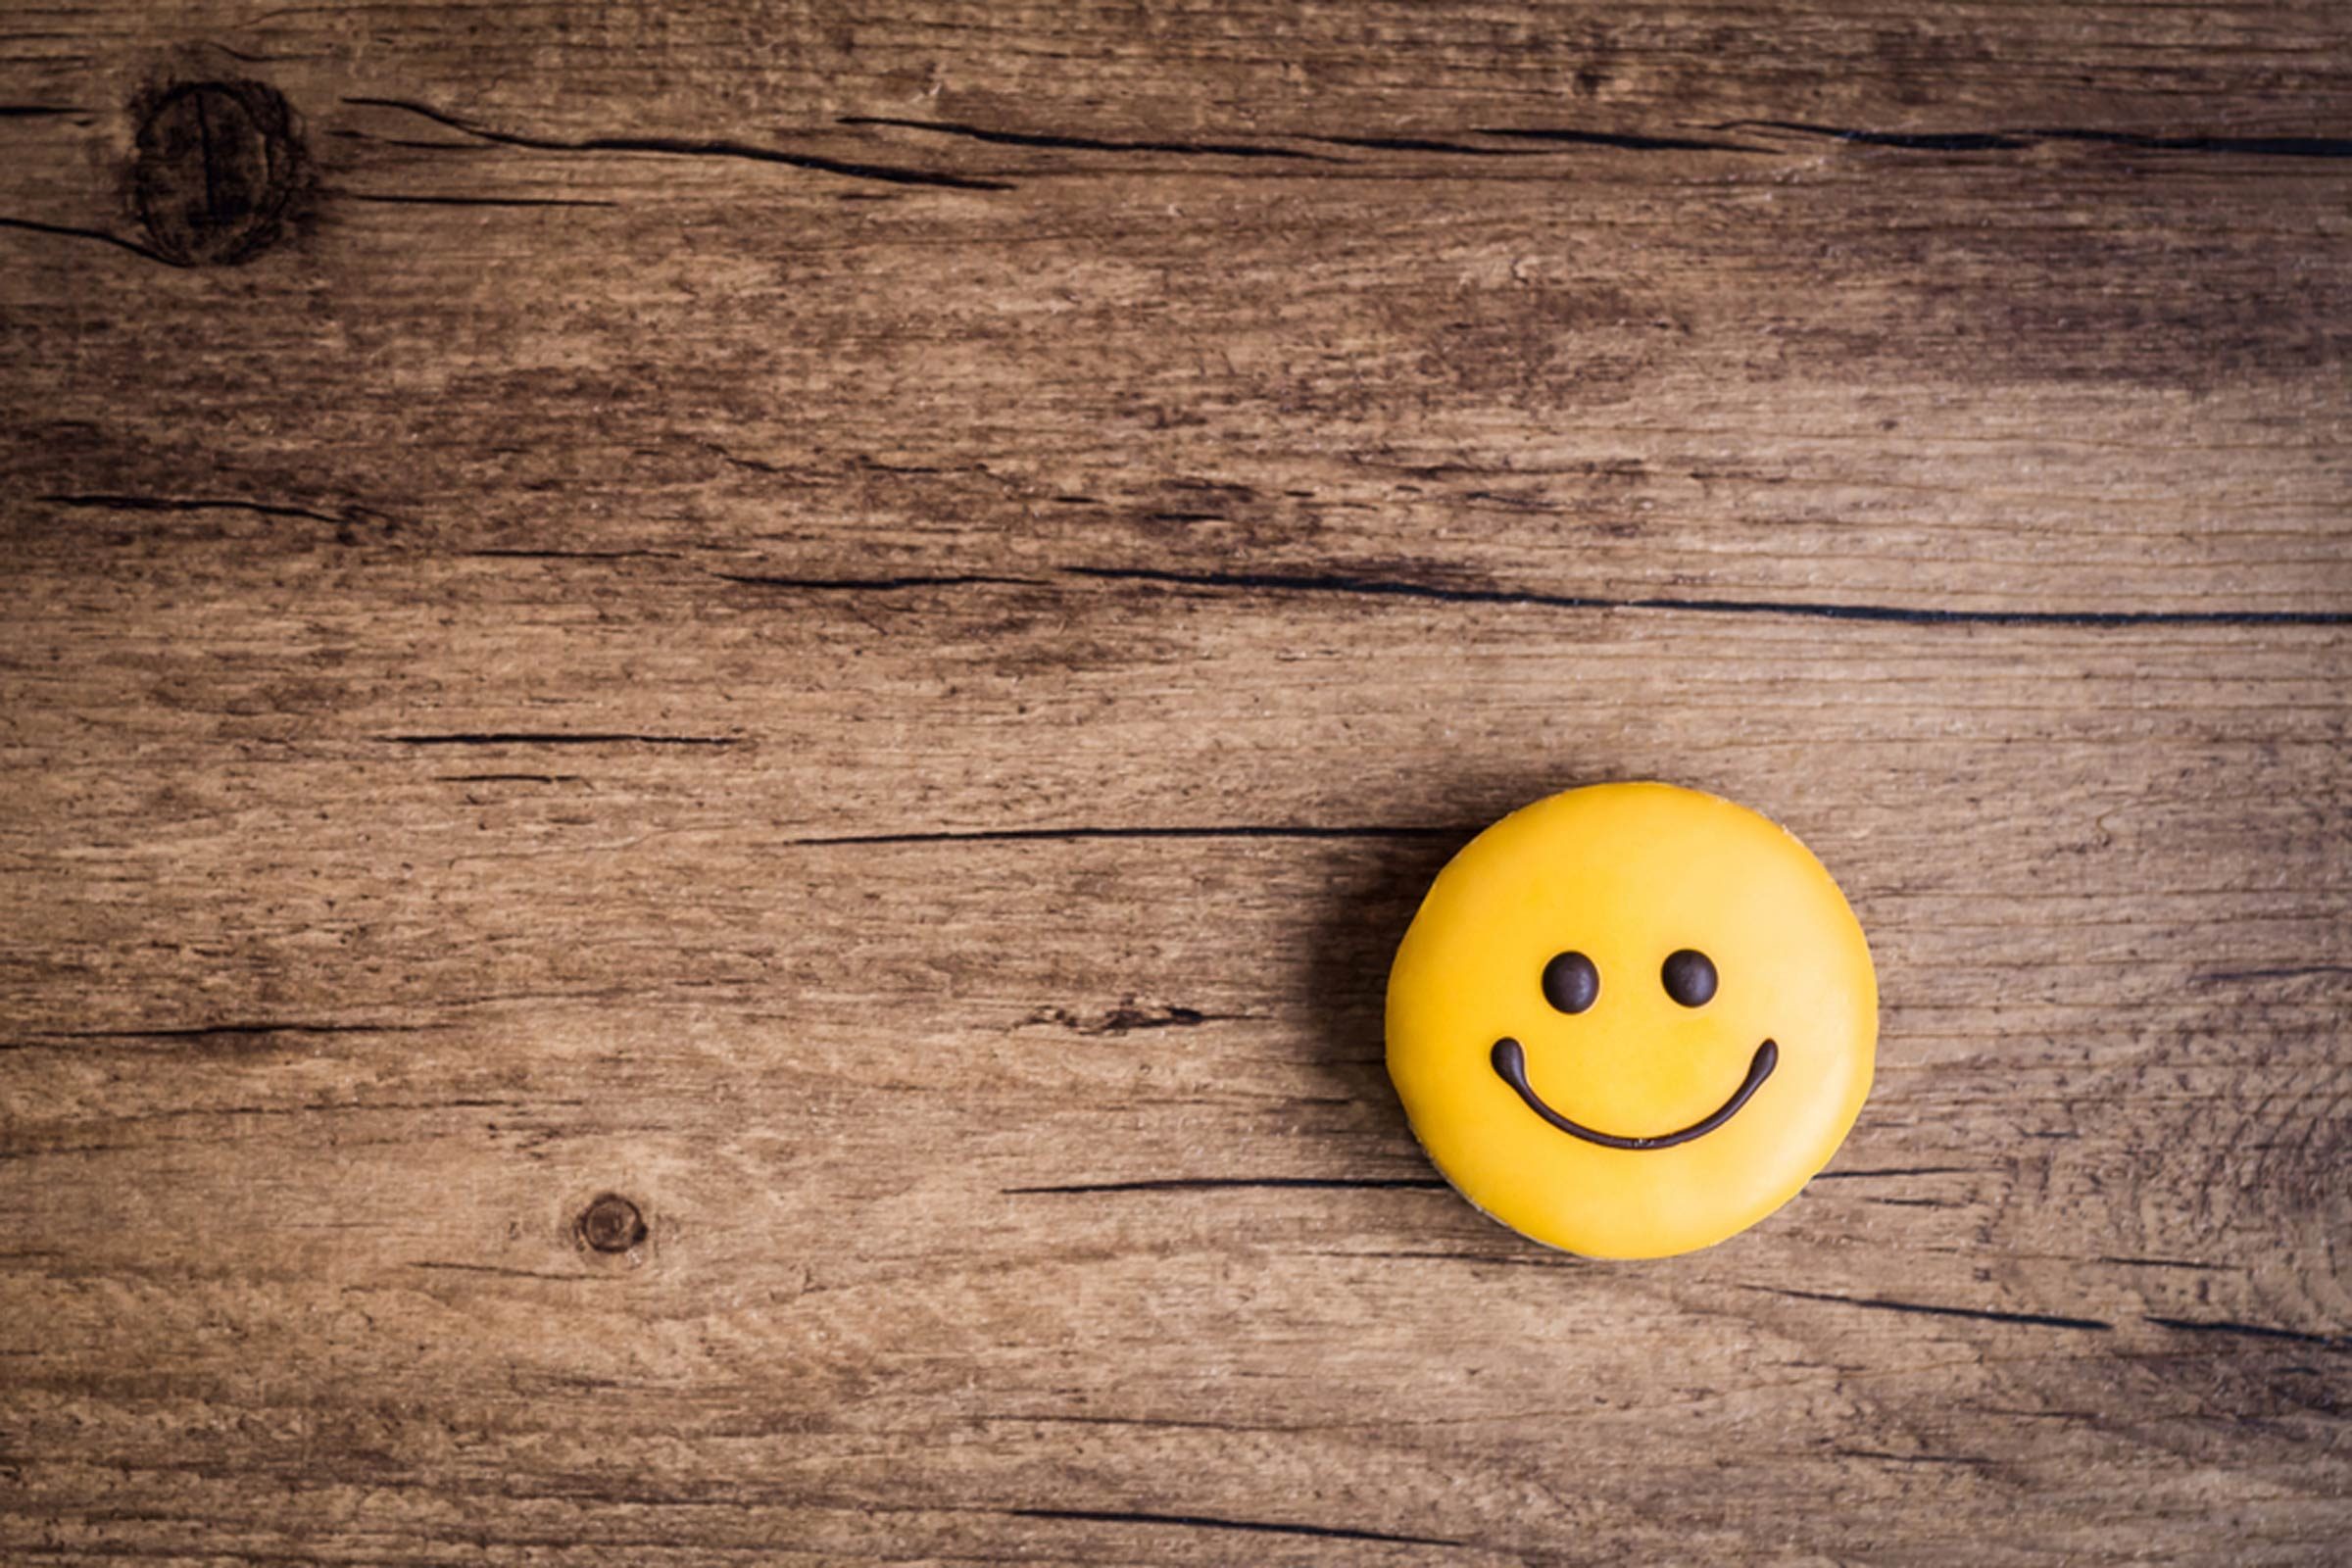 This Is the Strange (But True!) Origin of the Smiley Face | Reader's Digest